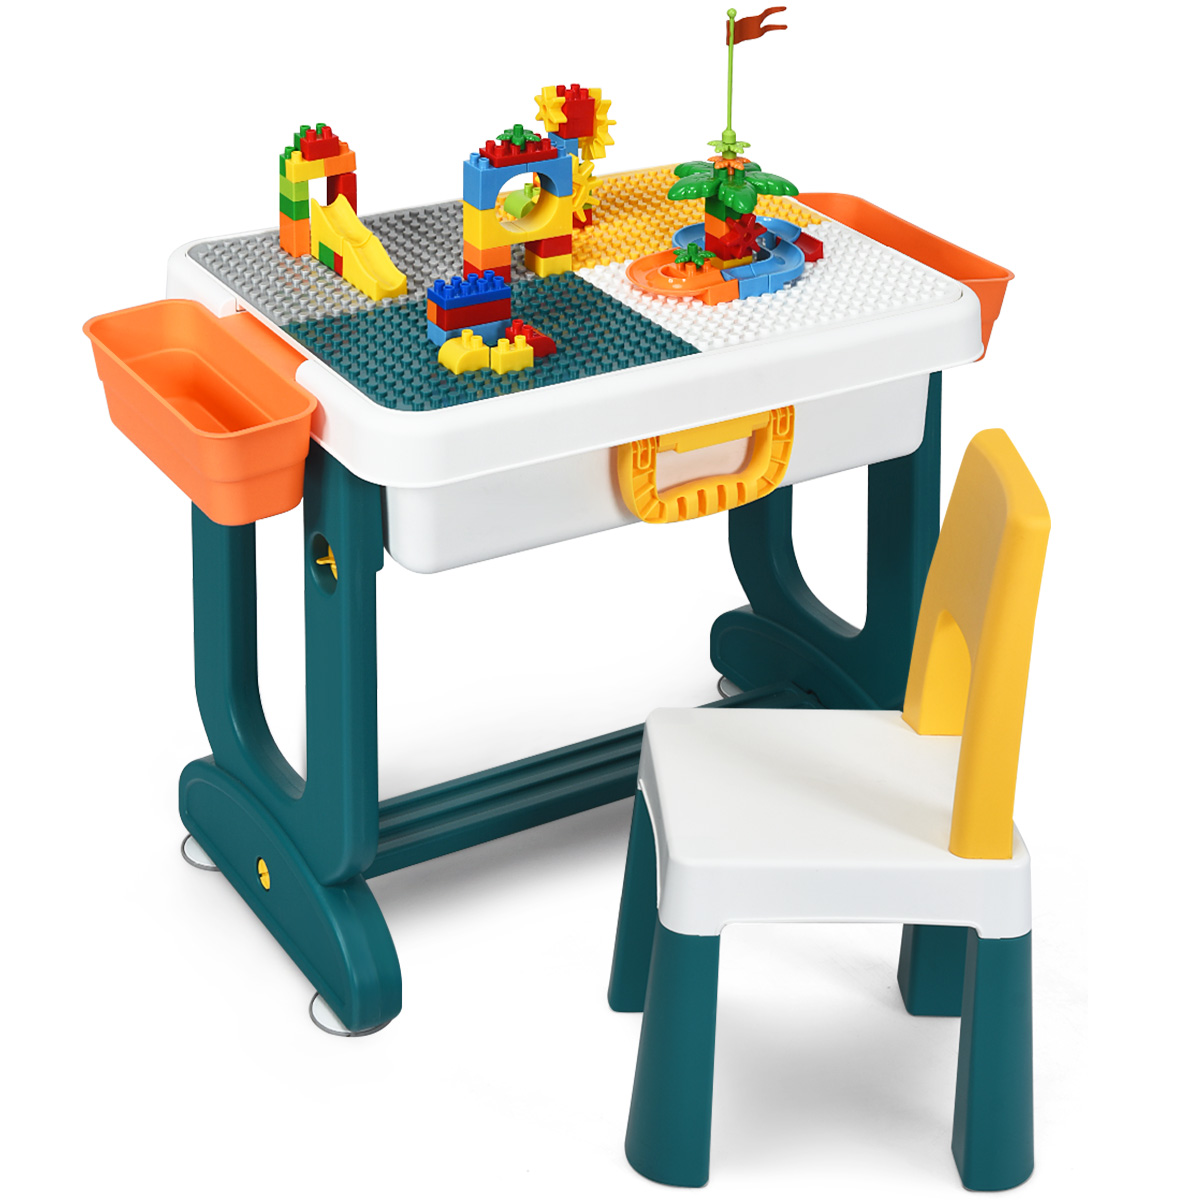 Topbuy Kids 5-In-1 Building Block Table w/Chair & Double-sided Table Top Children Drawing Table Best Gift for Kids